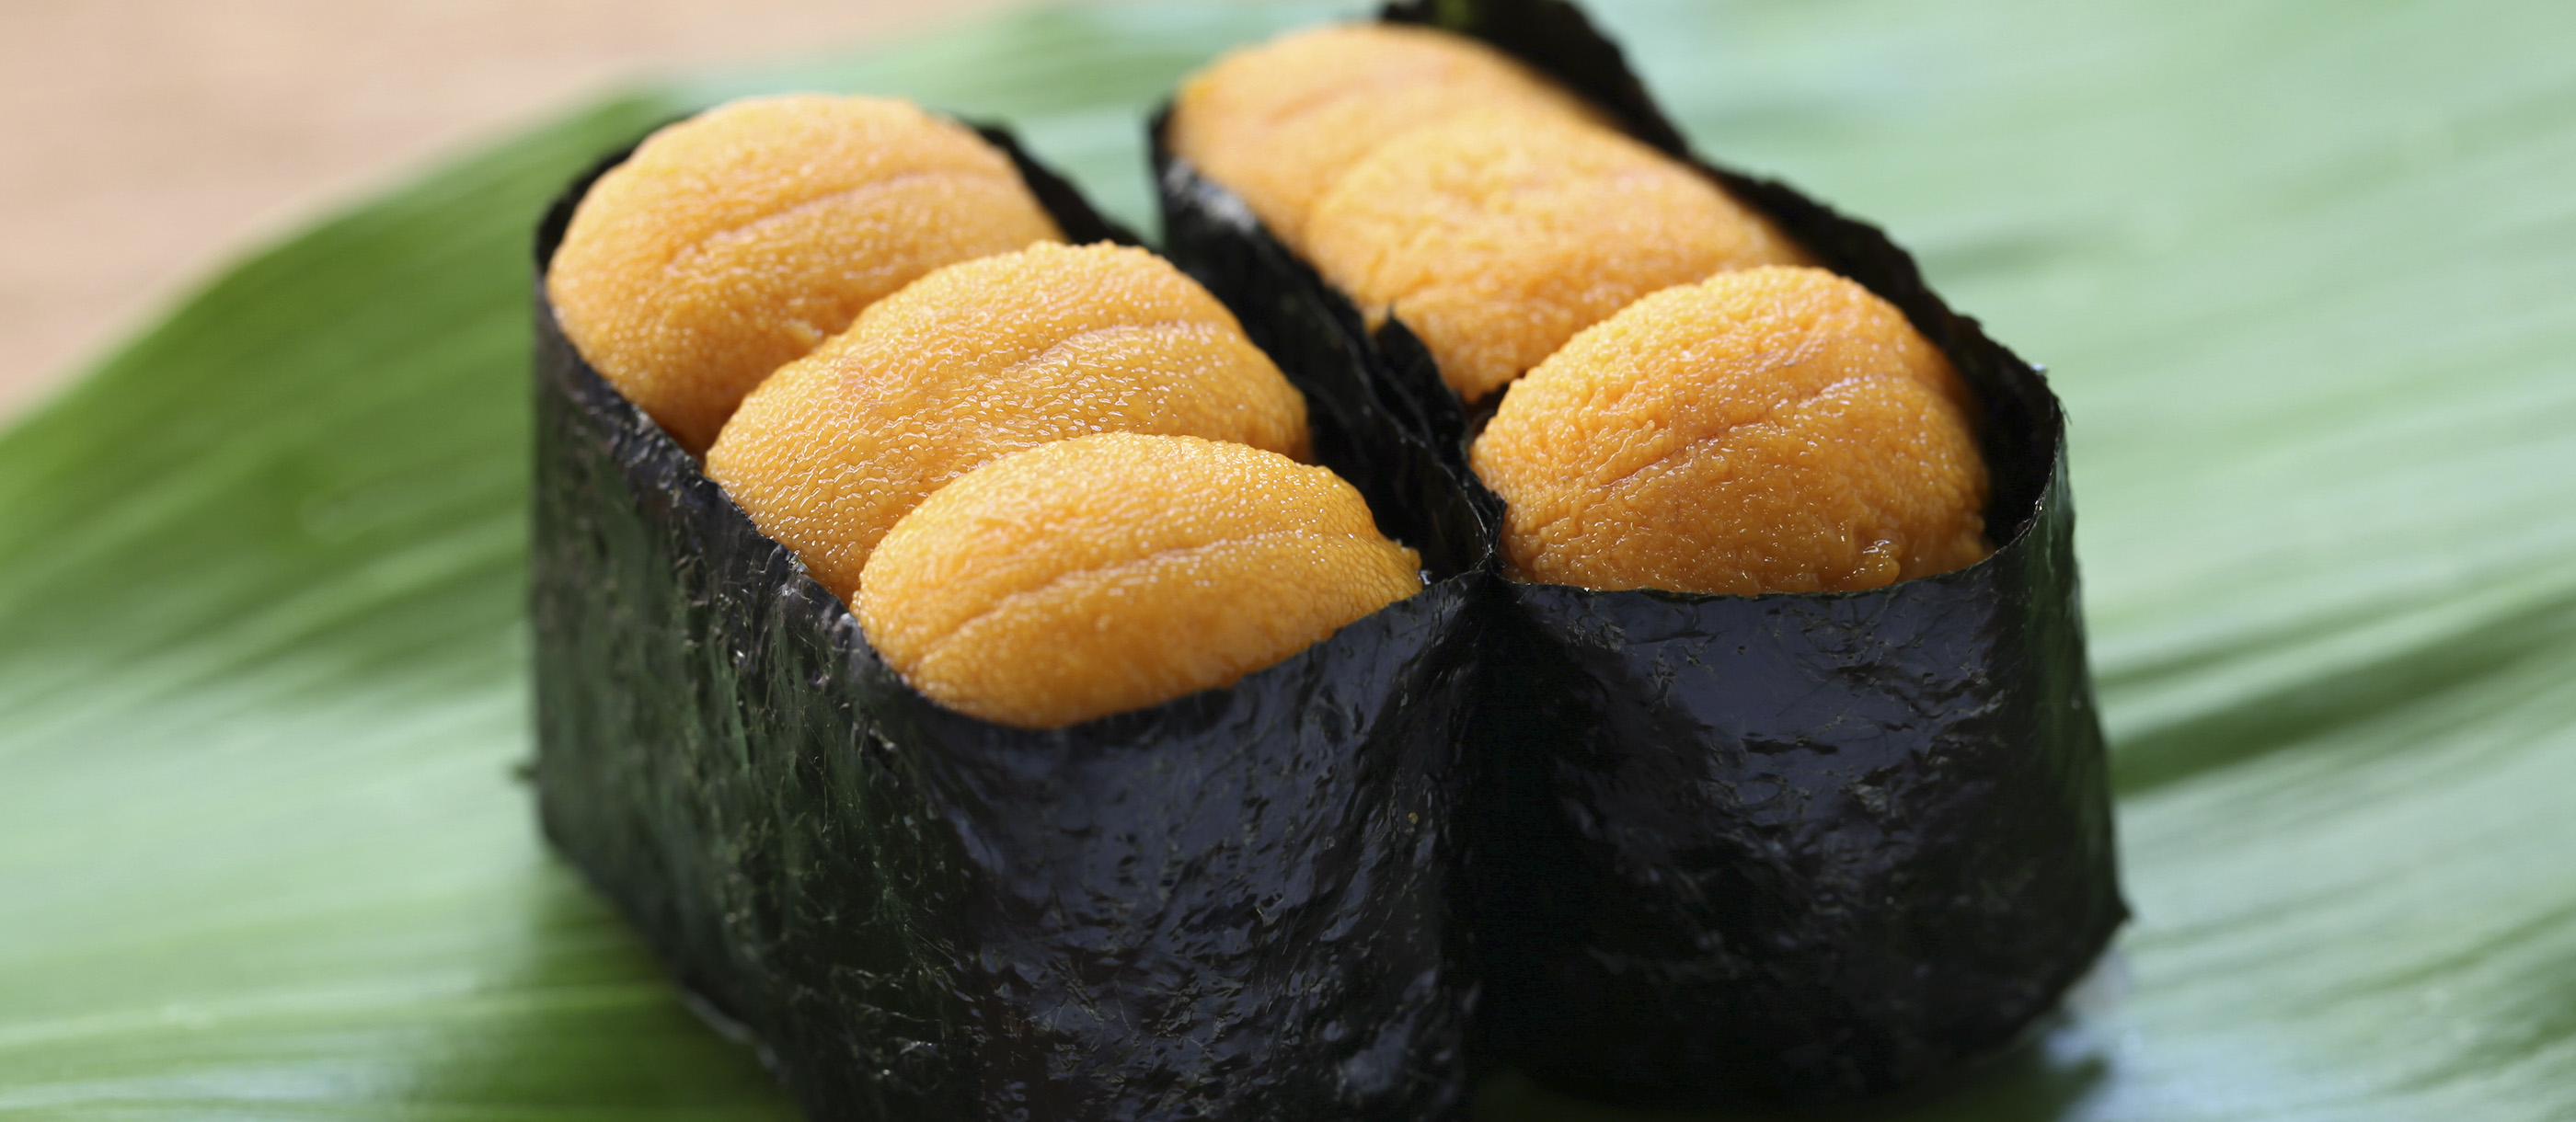 How Sea Urchin (Uni) Is Processed Commercially — How to Make It